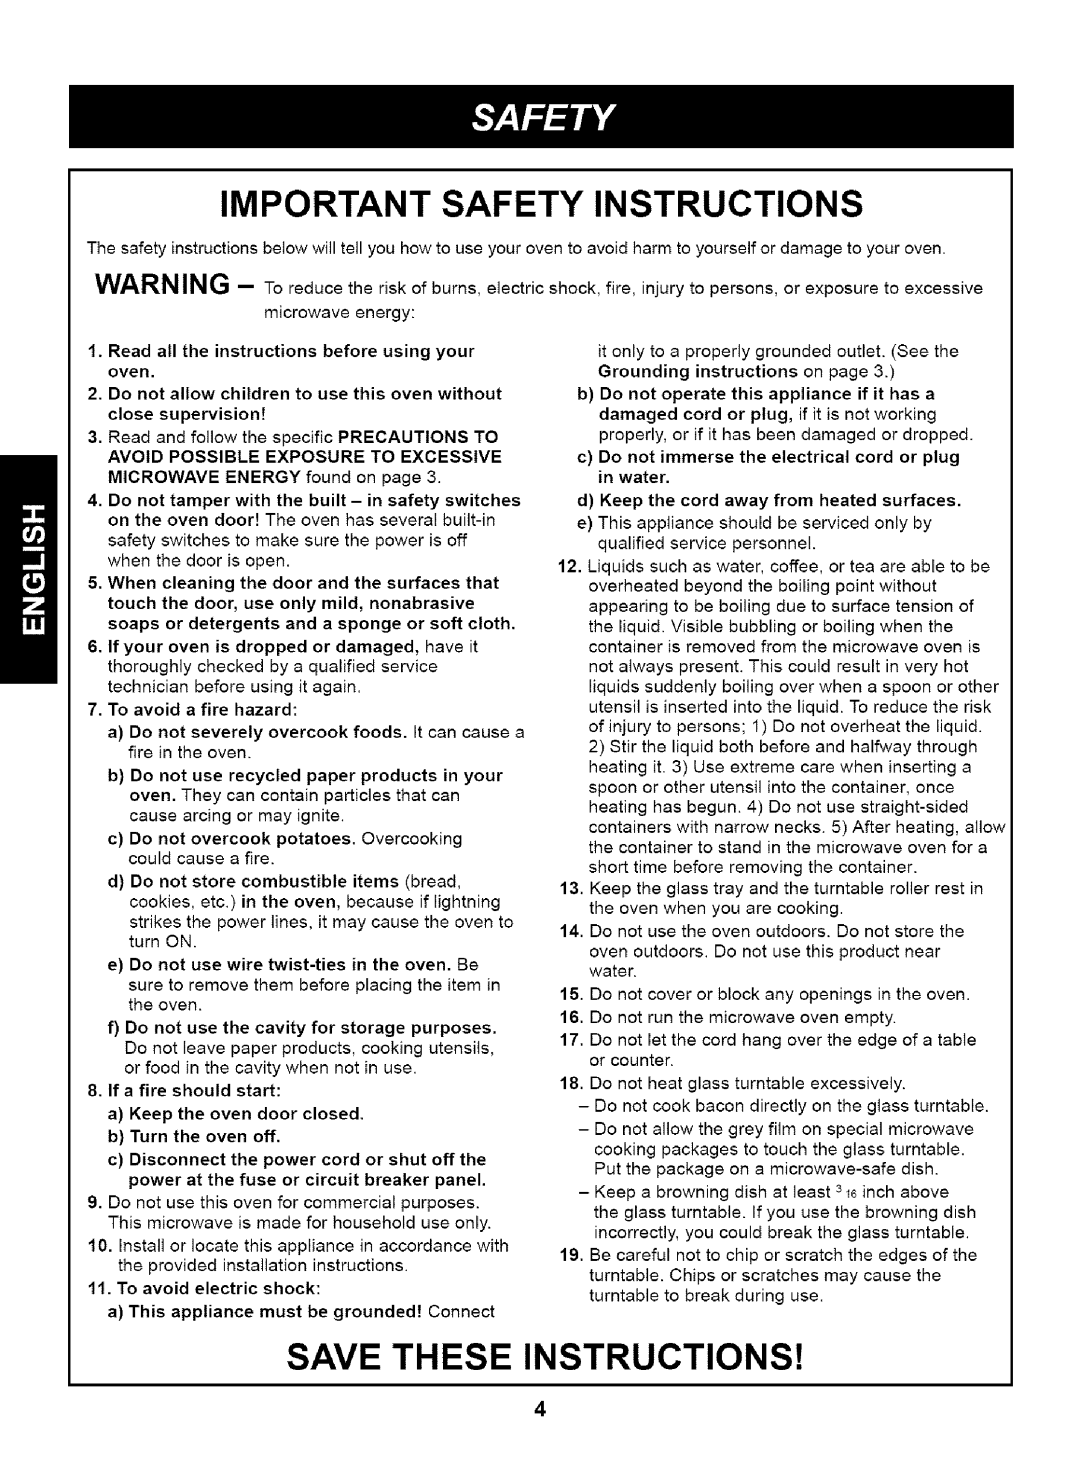 Kenmore 721.63263 manual Important Safety Instructions, Save These Instructions 